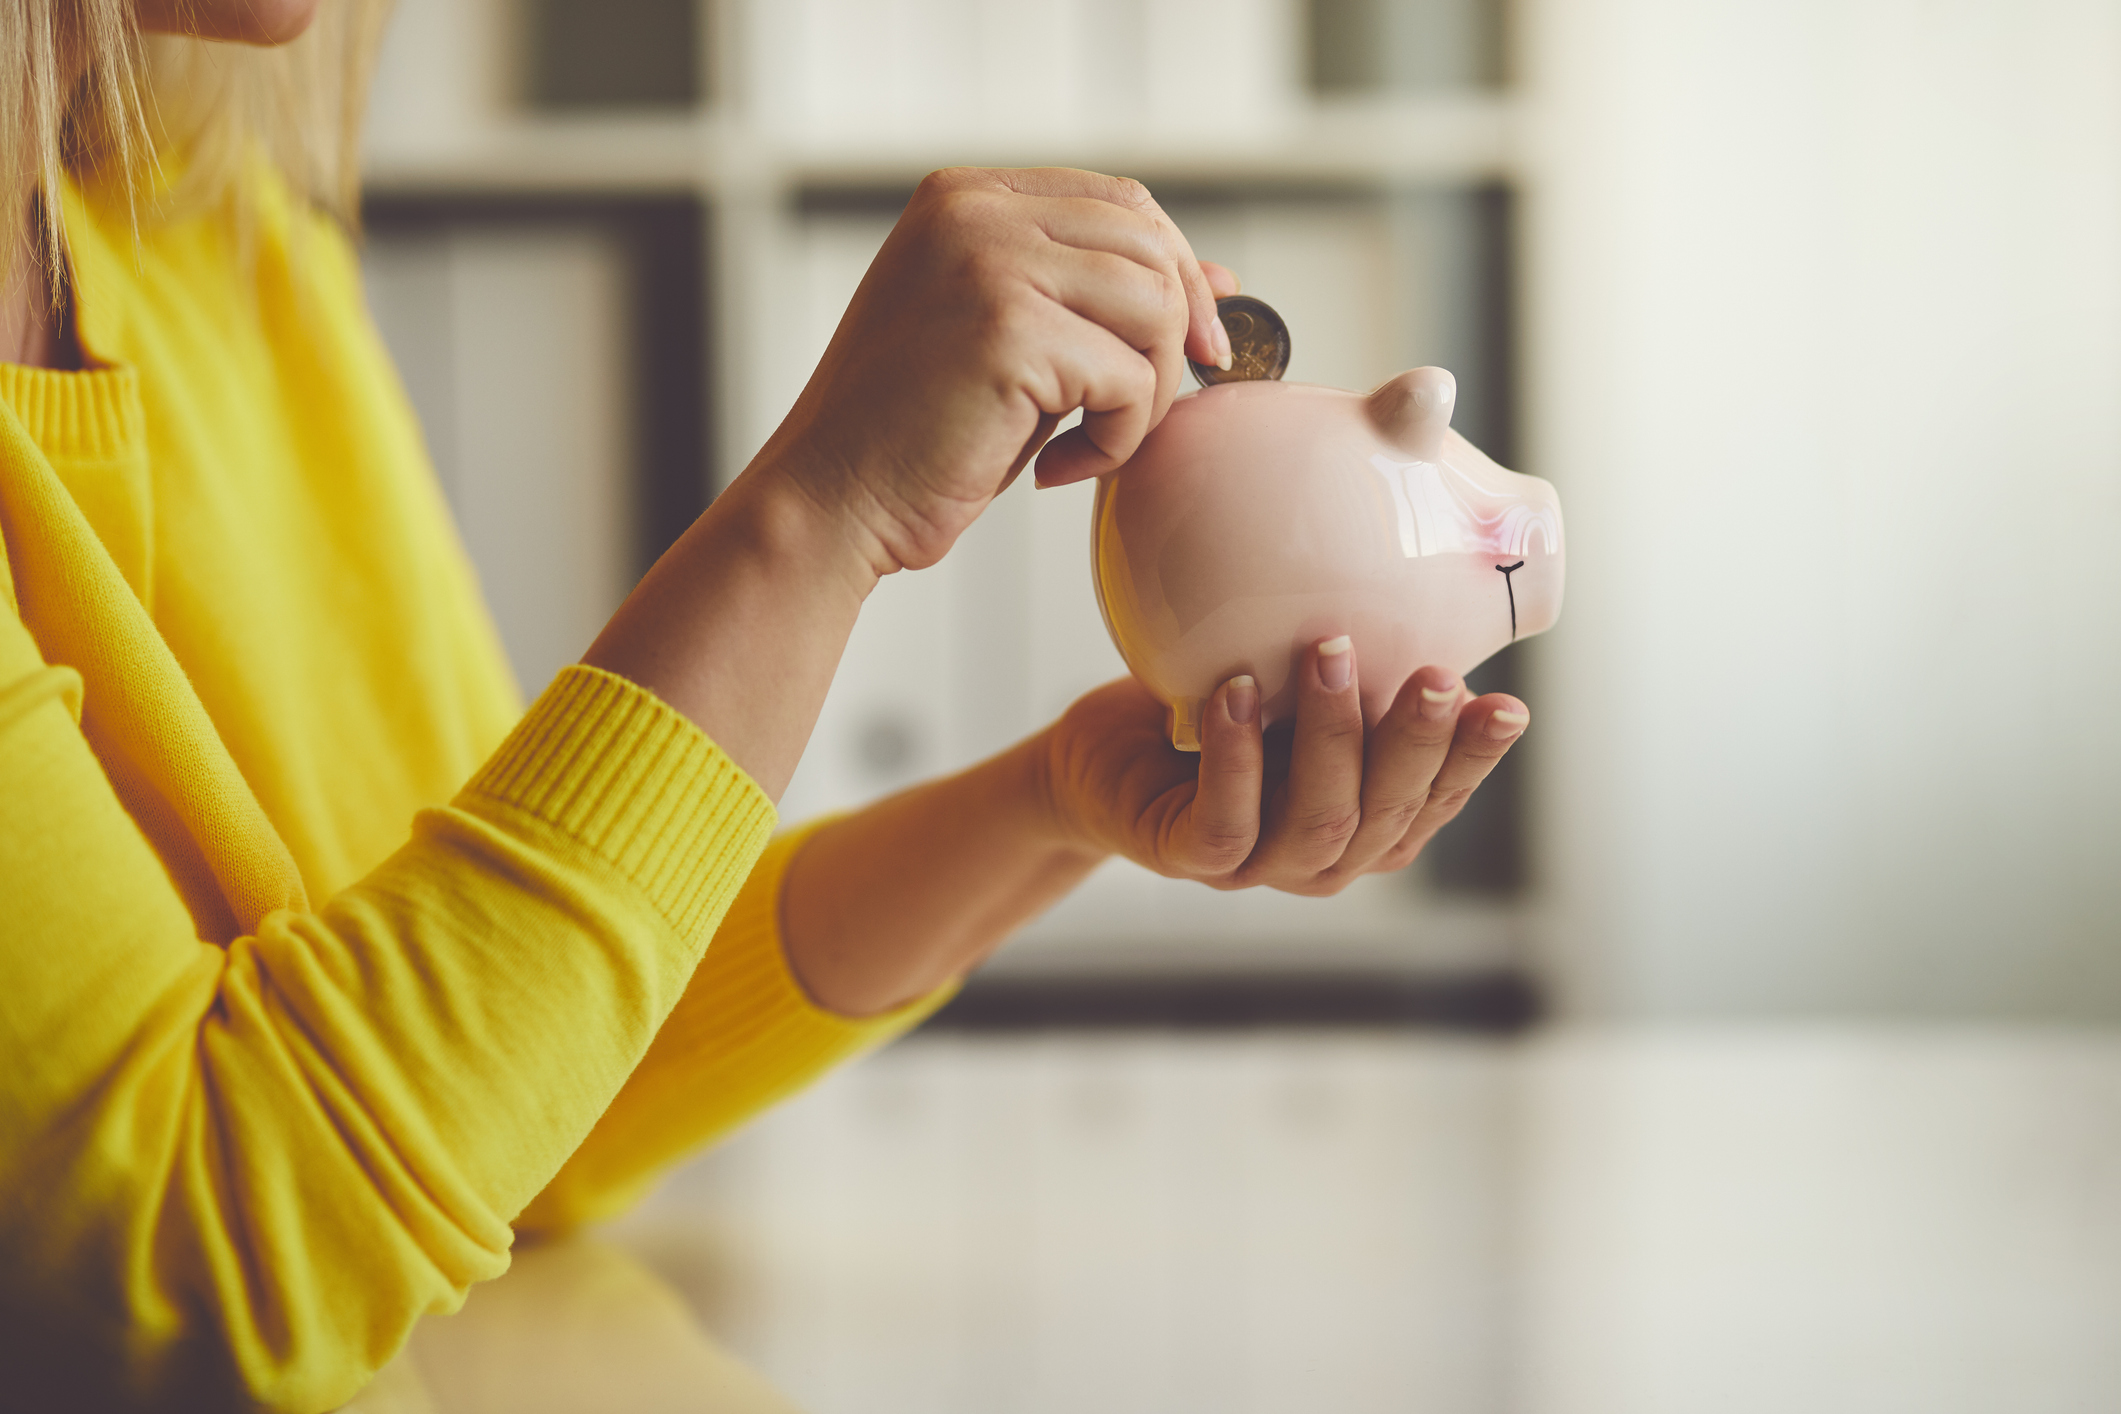 5 Tips for Saving Money in January